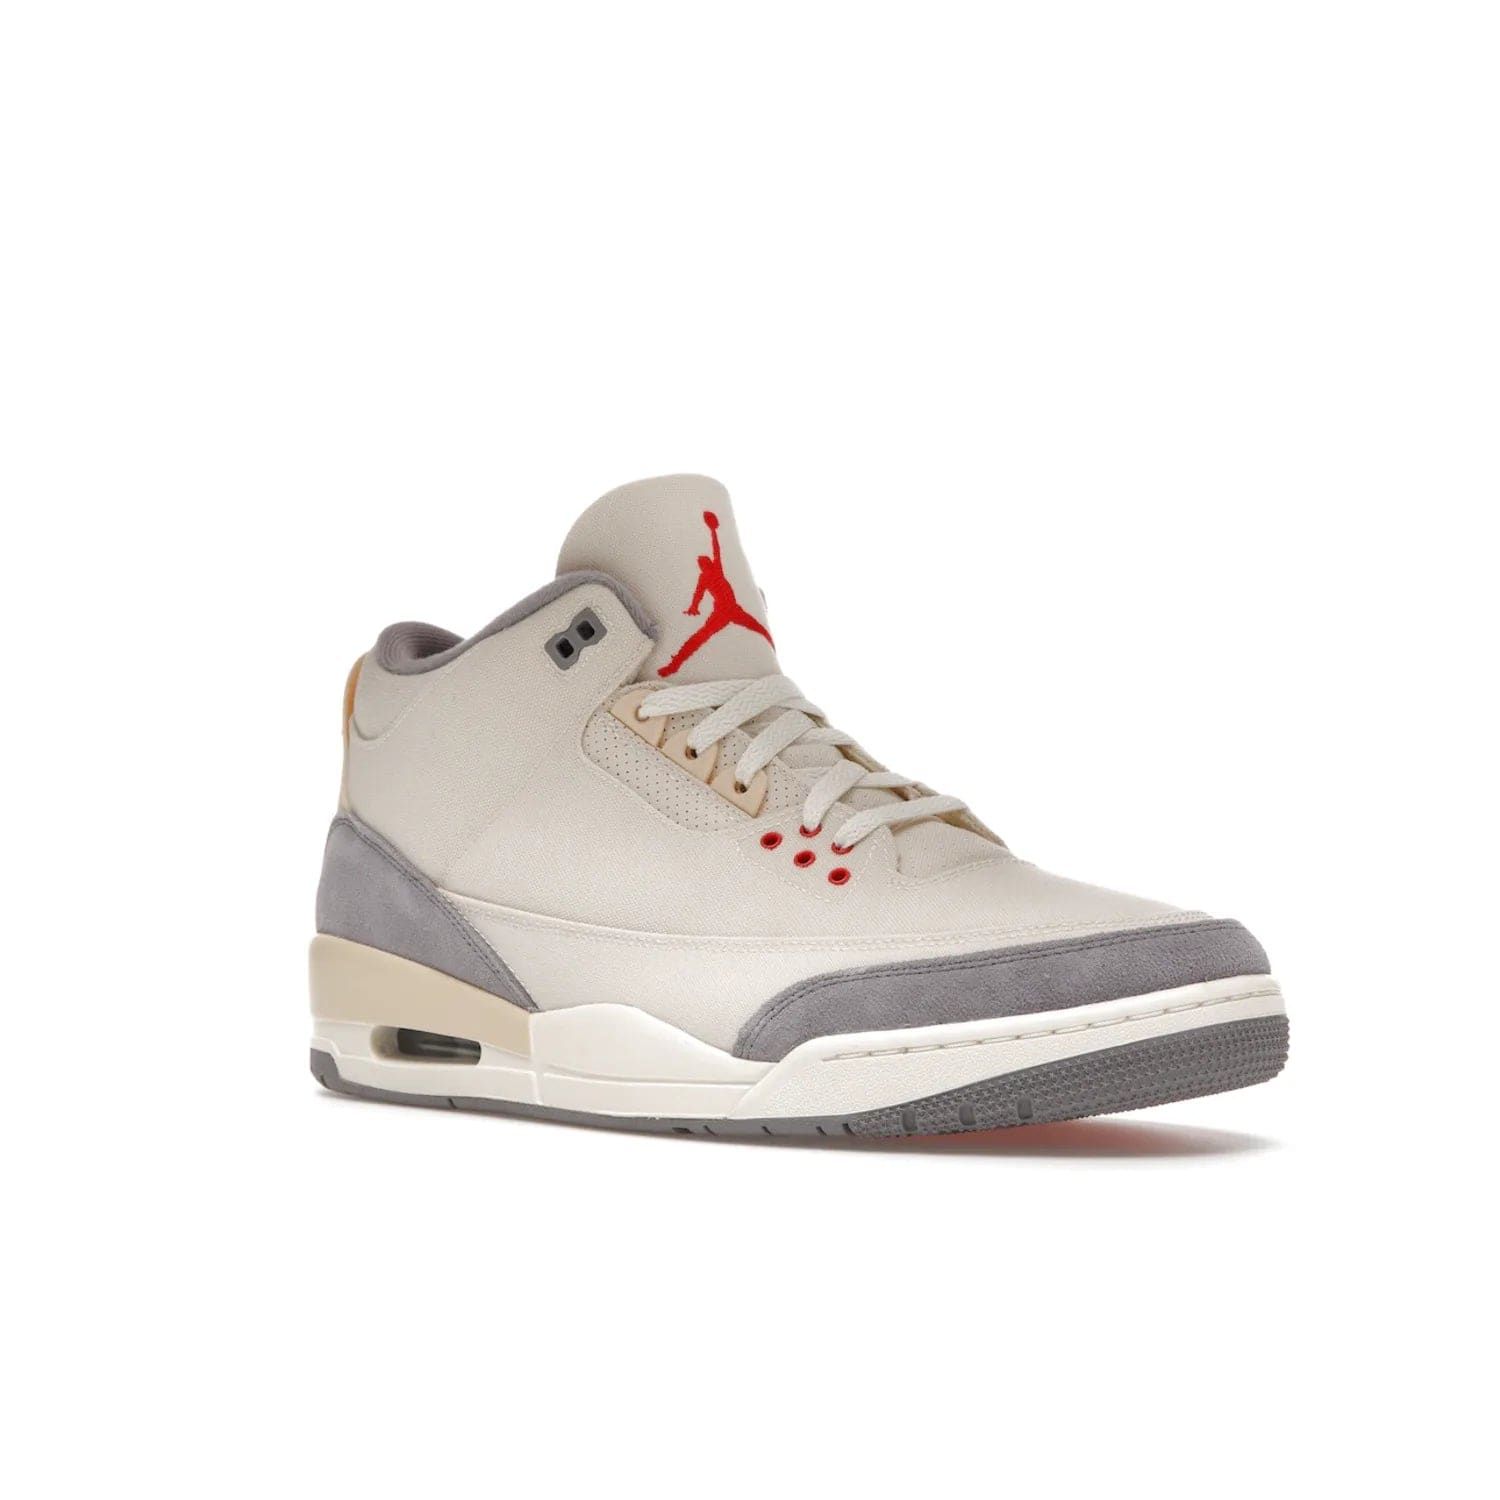 Jordan 3 Retro Muslin - Image 5 - Only at www.BallersClubKickz.com - Eye-catching Air Jordan 3 Retro Muslin in a neutral palette of grey, cream, and red. Featuring canvas upper, suede overlays and white/grey Air Max sole. Available in March 2022.